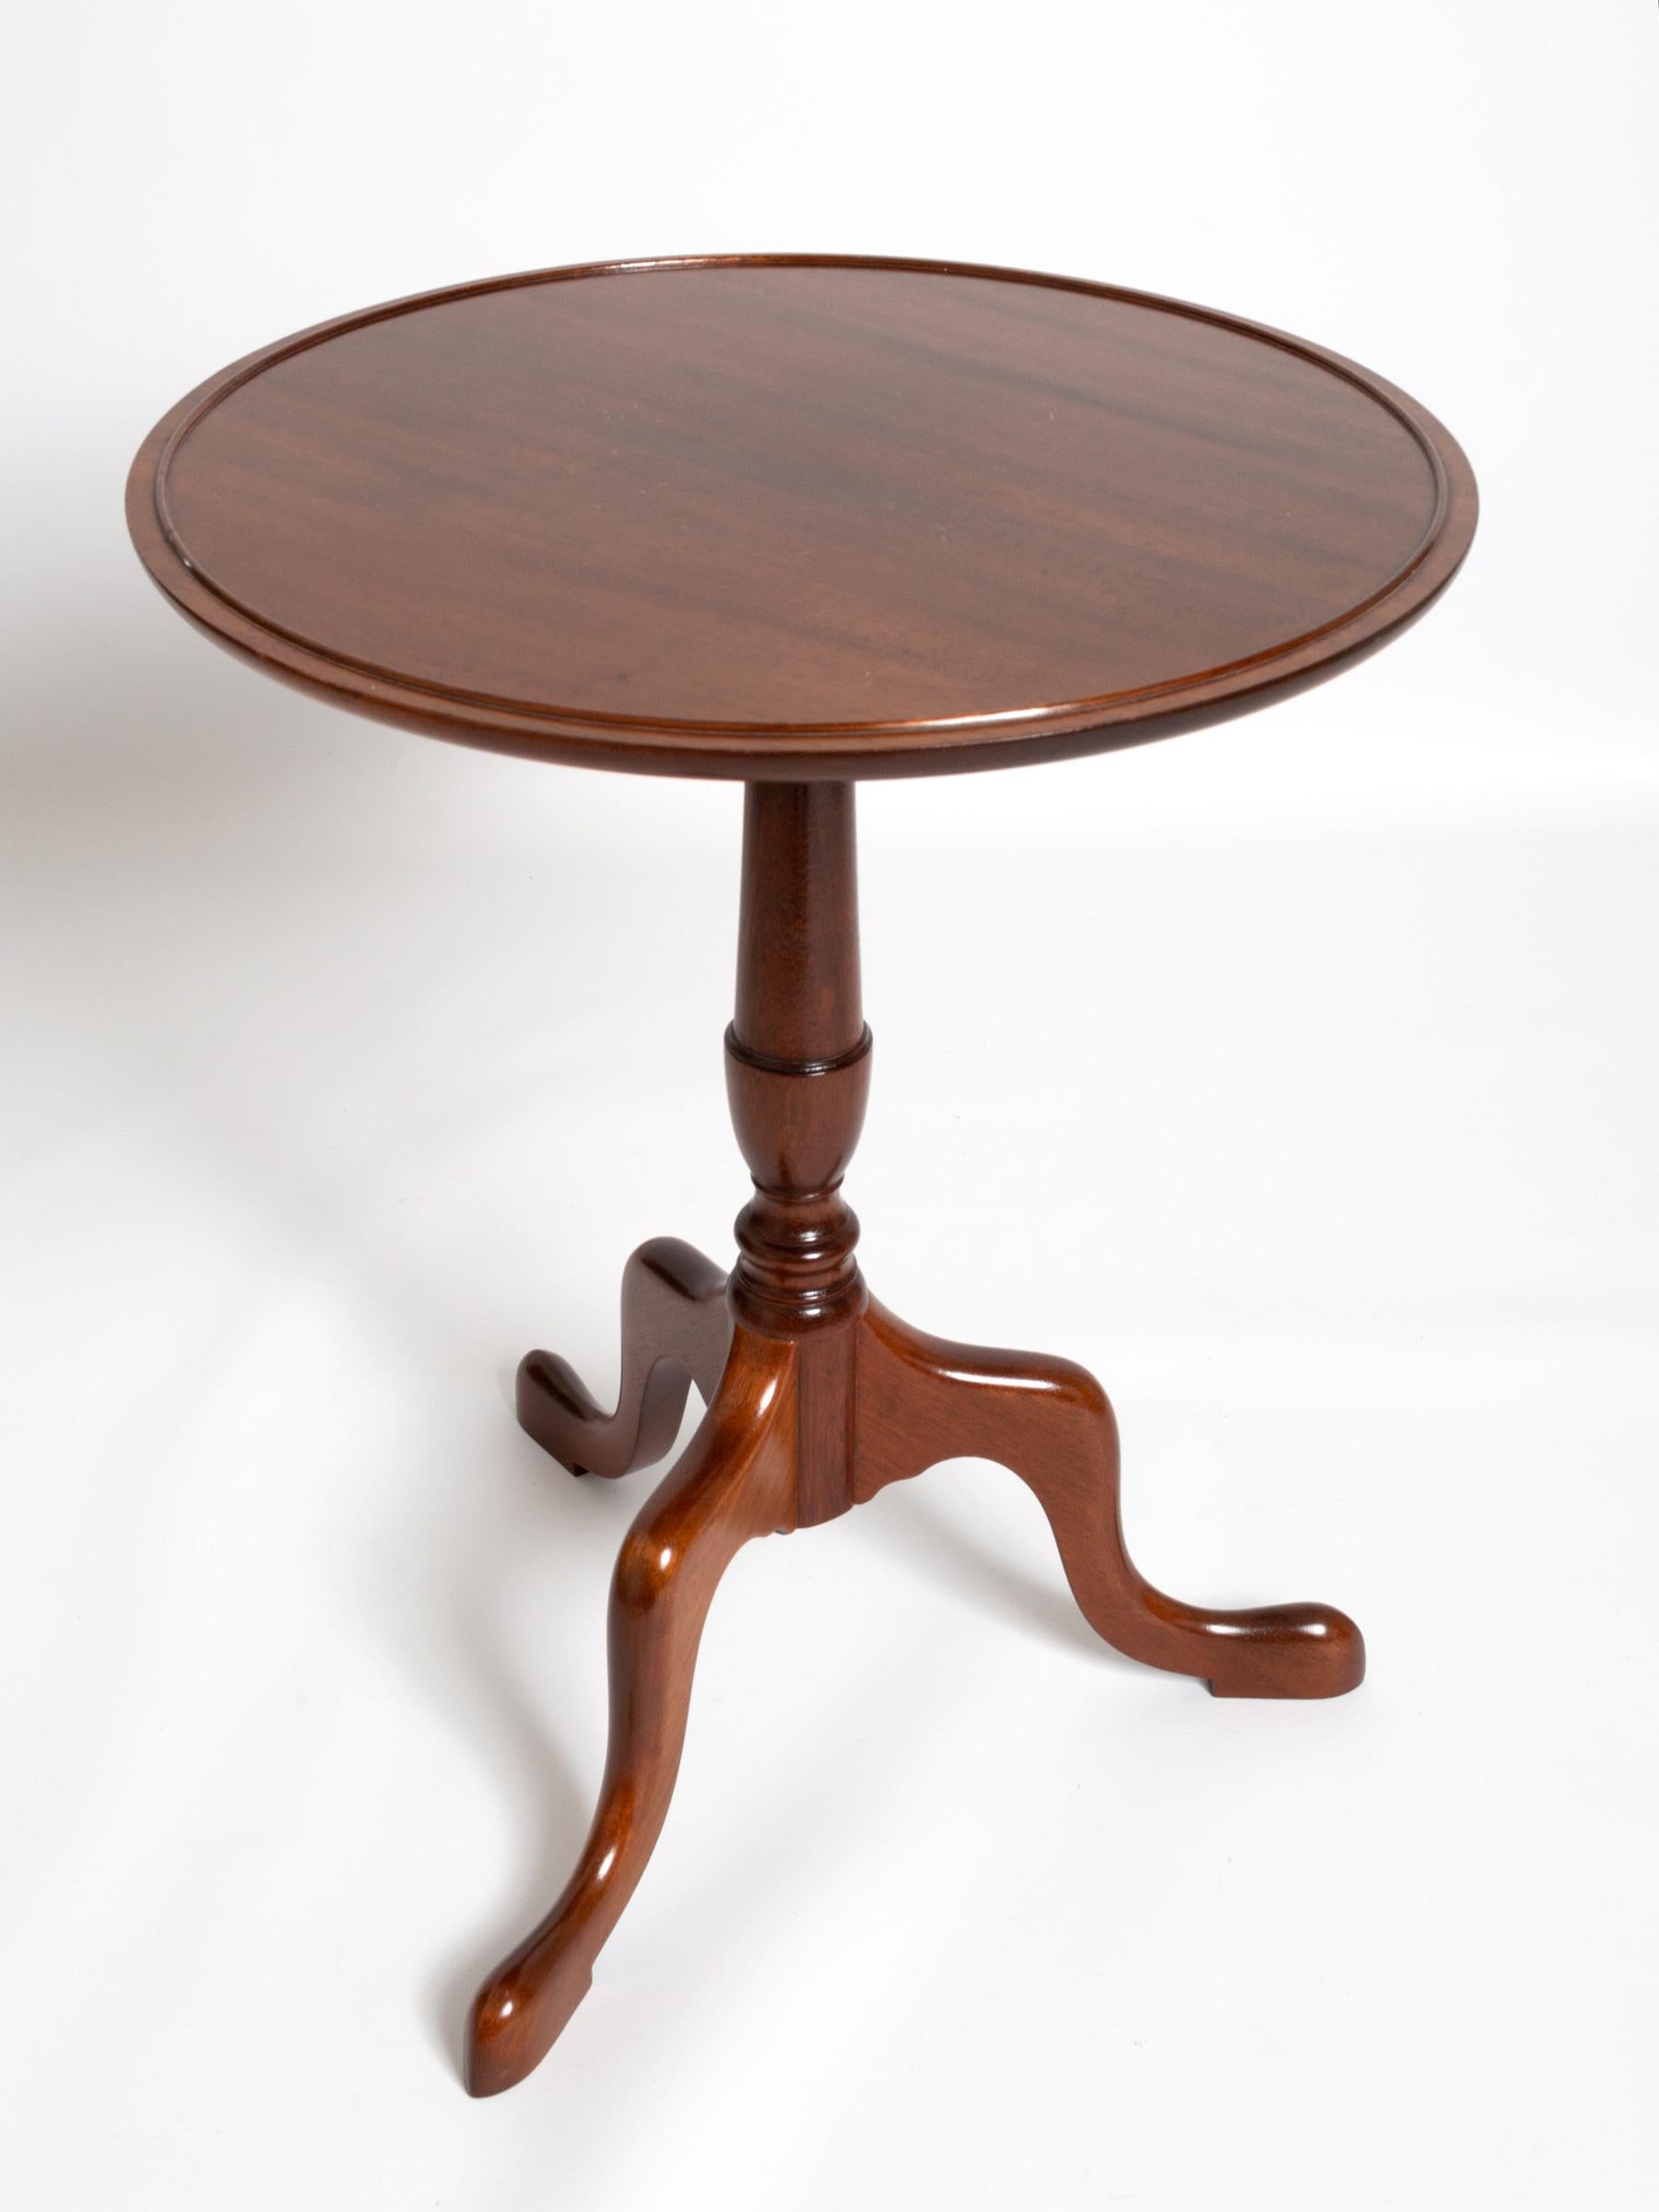 Antique Georgian Style Mahogany Tripod Side Table by Redman & Hales, England.
A quality piece, constructed from solid mahogany.
In excellent condition, commensurate of age and use.